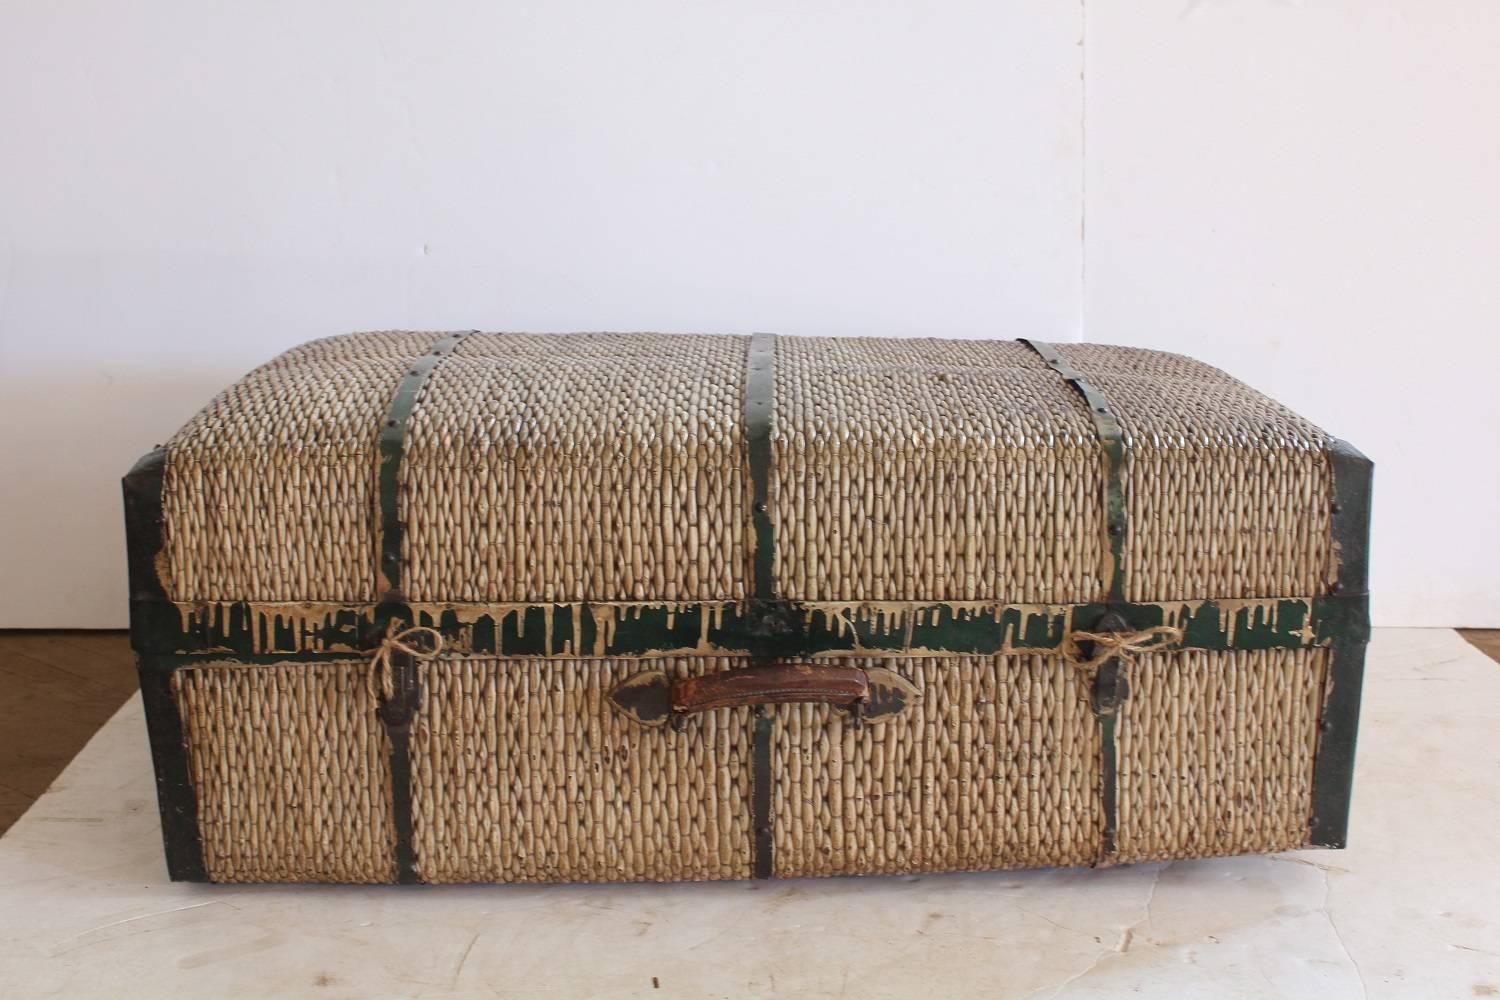 Large antique straw and metal suitcase.